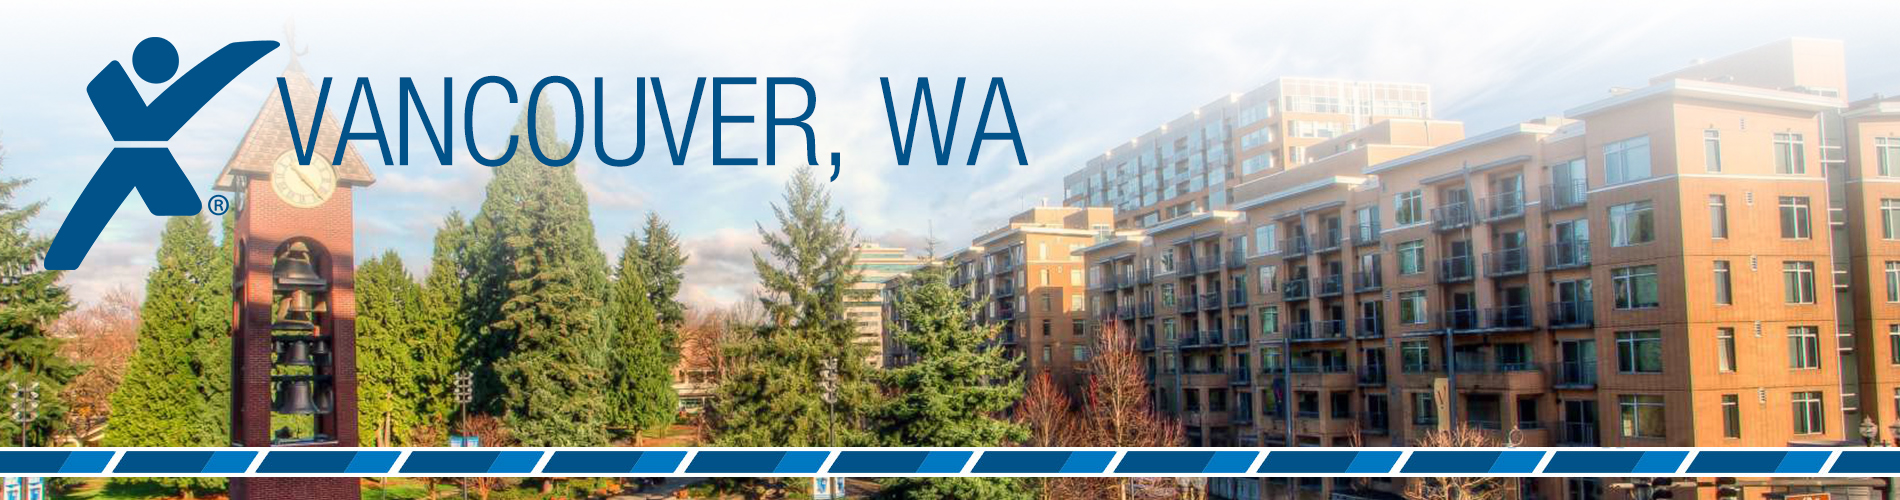 Express Employment in Vancouver, WA - (360) 883-3600